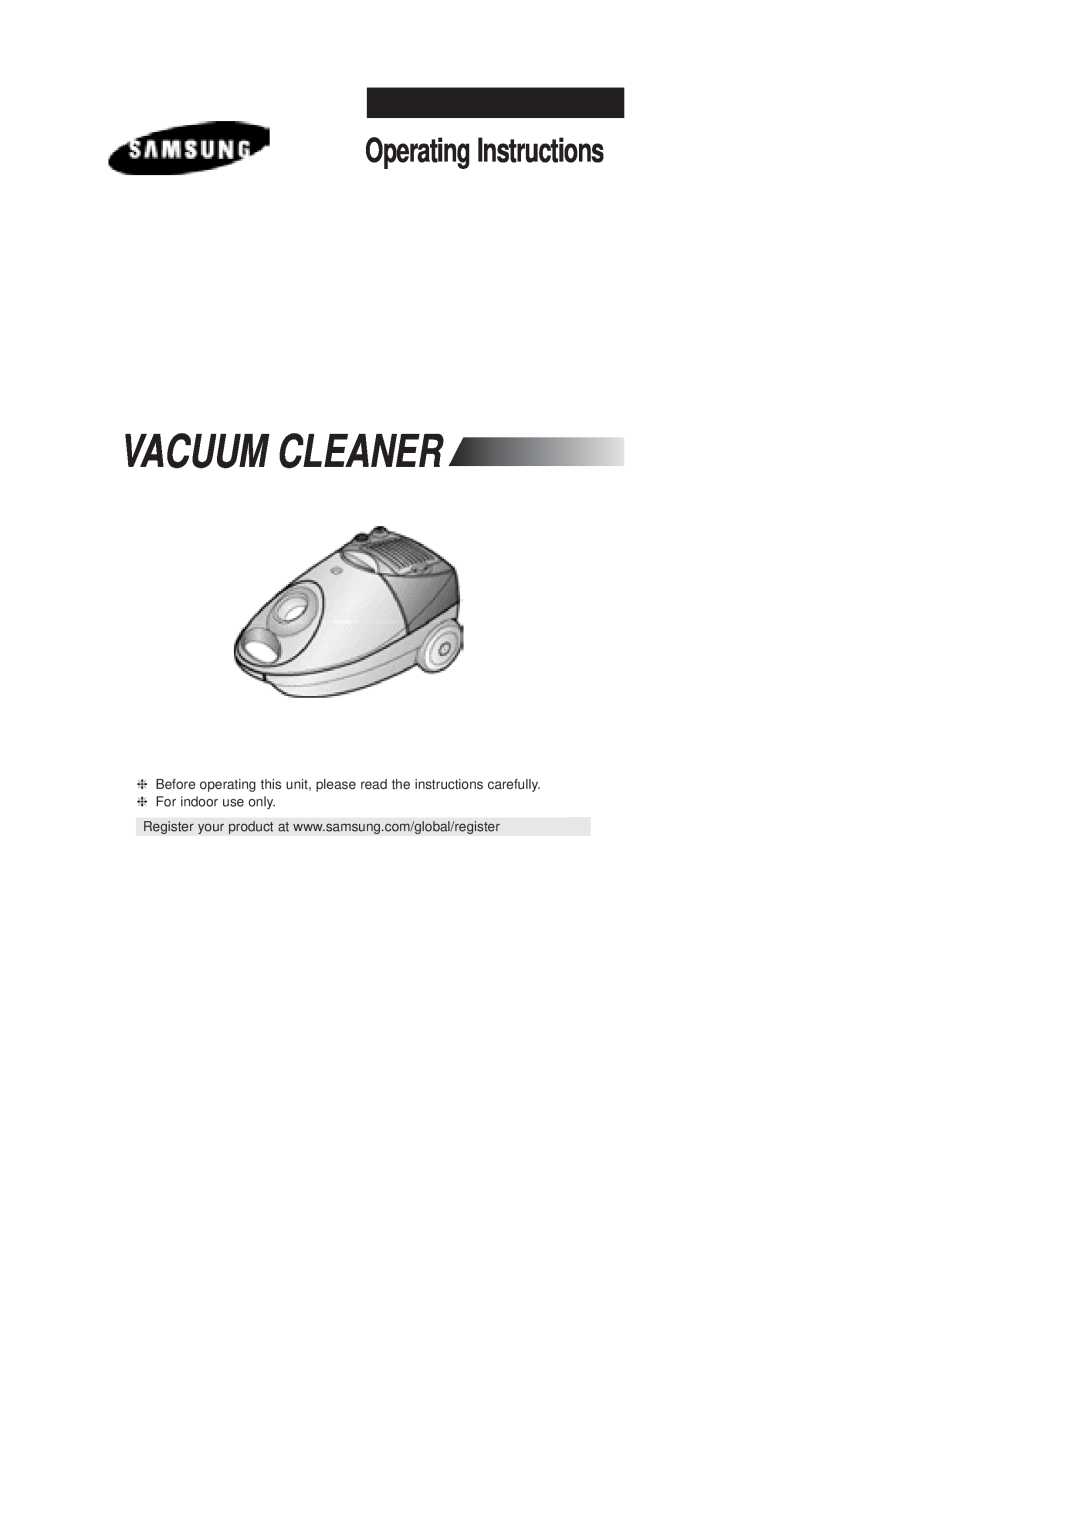 Samsung VCC4020S3R/ERP, VCC4040V3R/XEG, VCC4020S2R/UMG, VCC4040V3B/XEF manual Vacuum Cleaner, Operating Instructions 